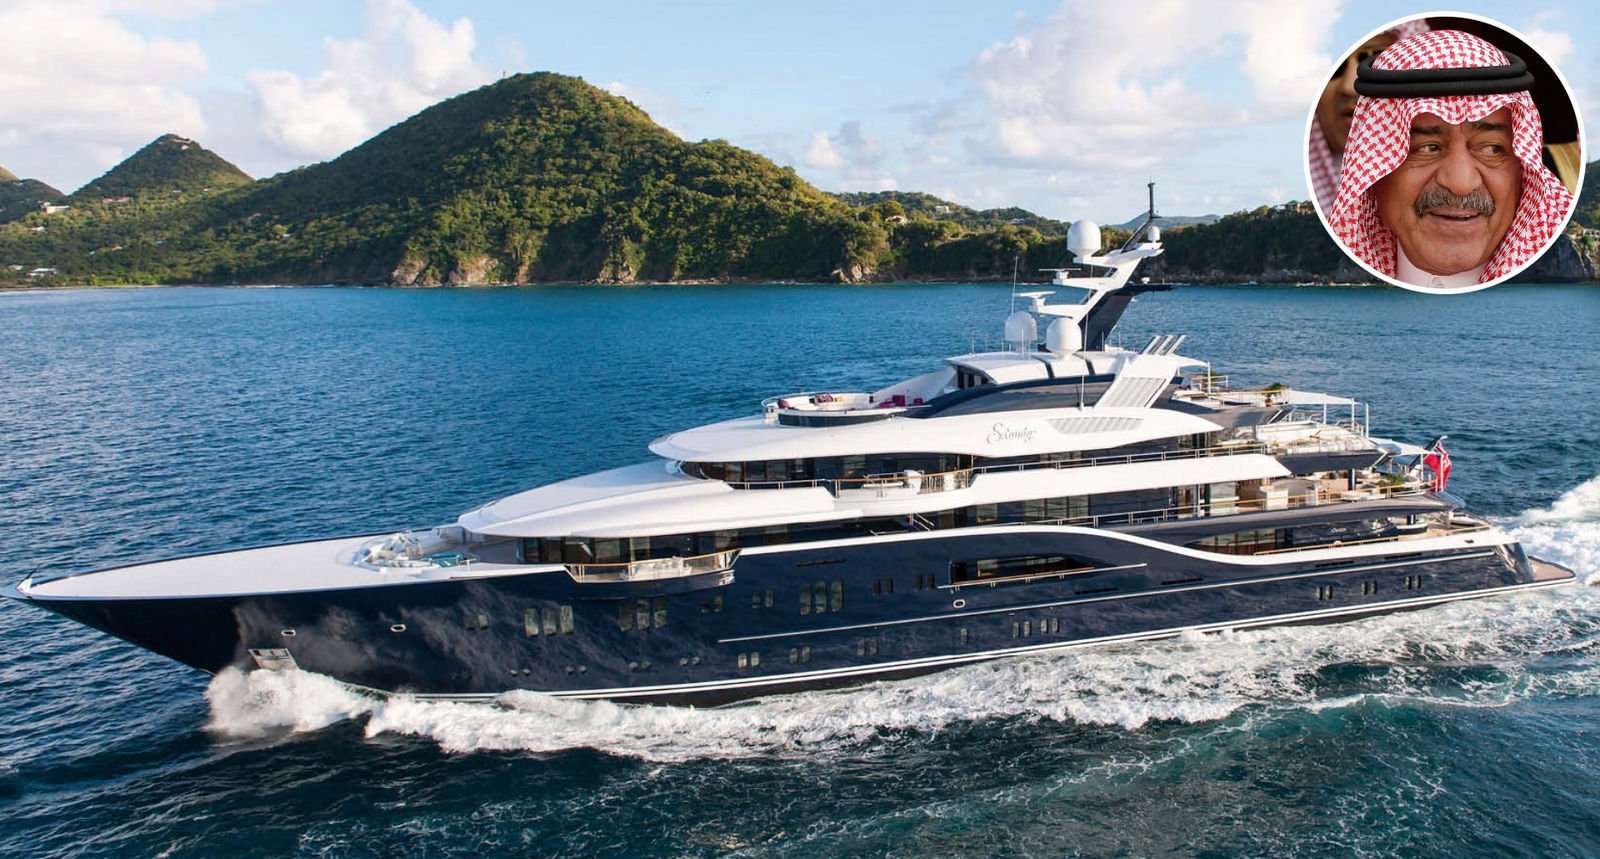 Gifted to a Saudi prince, this $150 million Lurssen superyacht boasts gold leaf ceilings and a 280-foot golden sculpture made up of 1,423 jewel-toned flower points. The Solandge Yacht is so stunning that it was featured in the season finale of the HBO TV drama ‘Succession’.